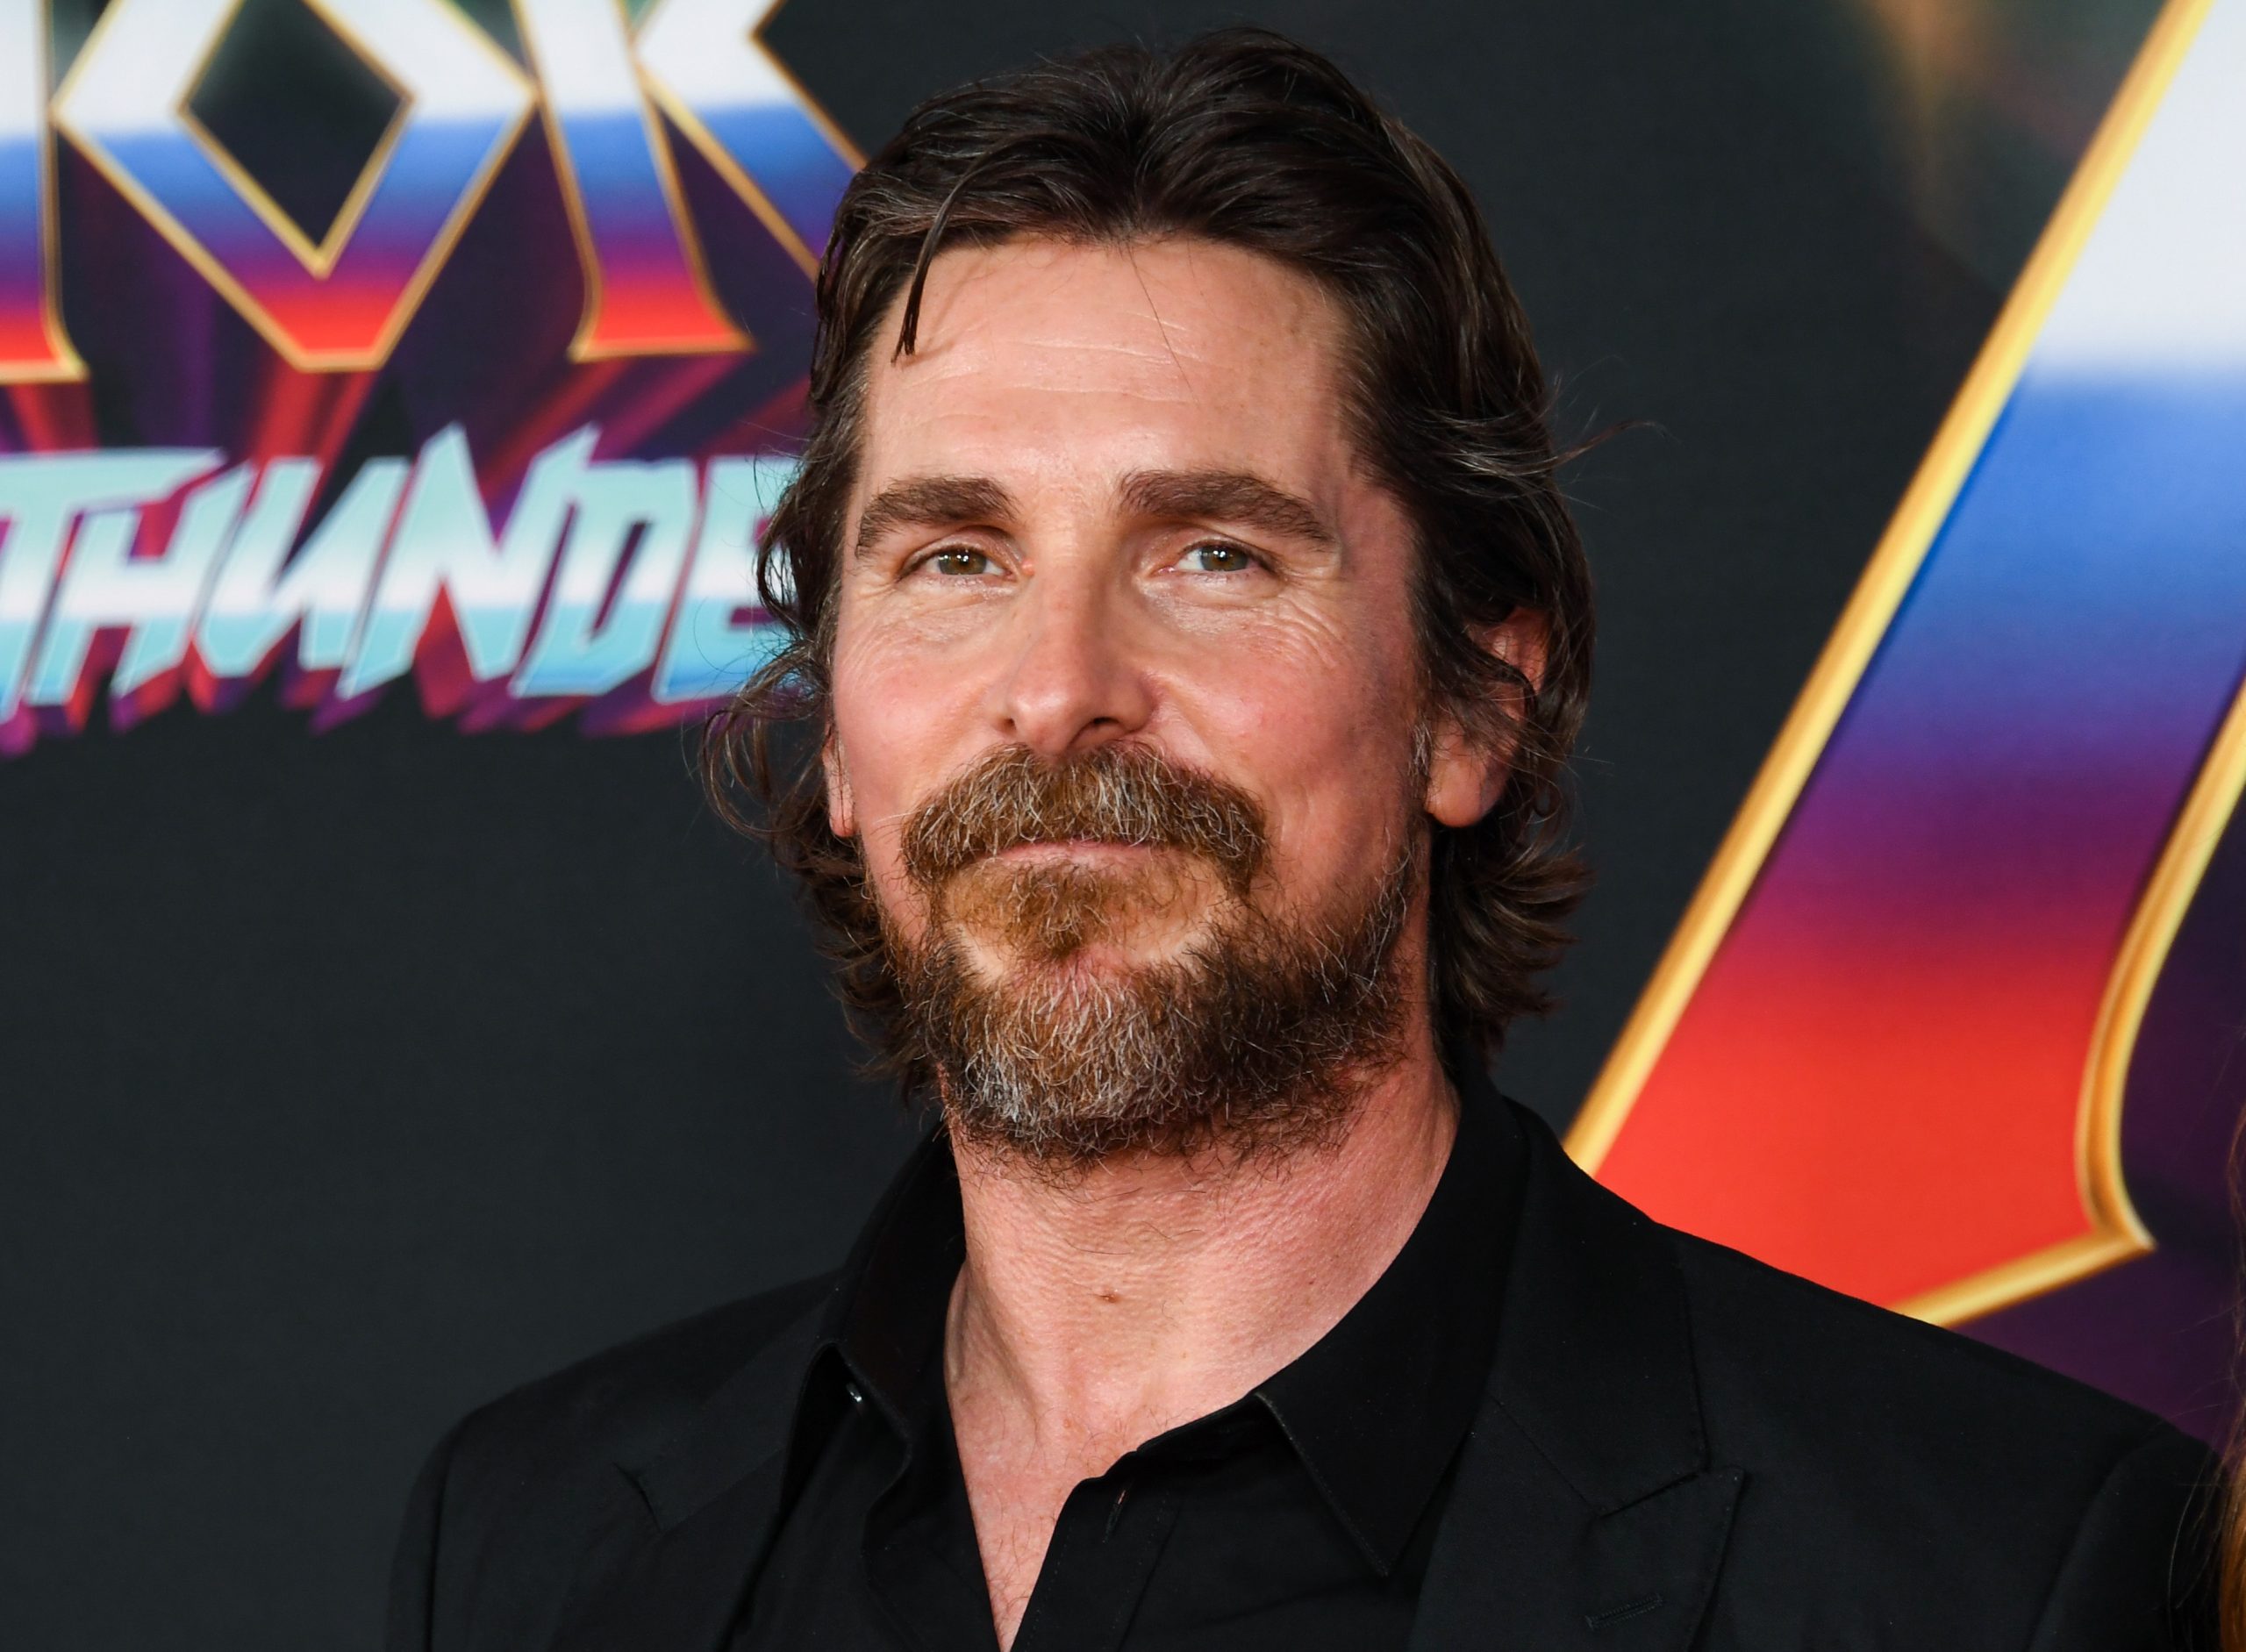 Batman actor Christian Bale attends the premiere of Thor: Love and Thunder